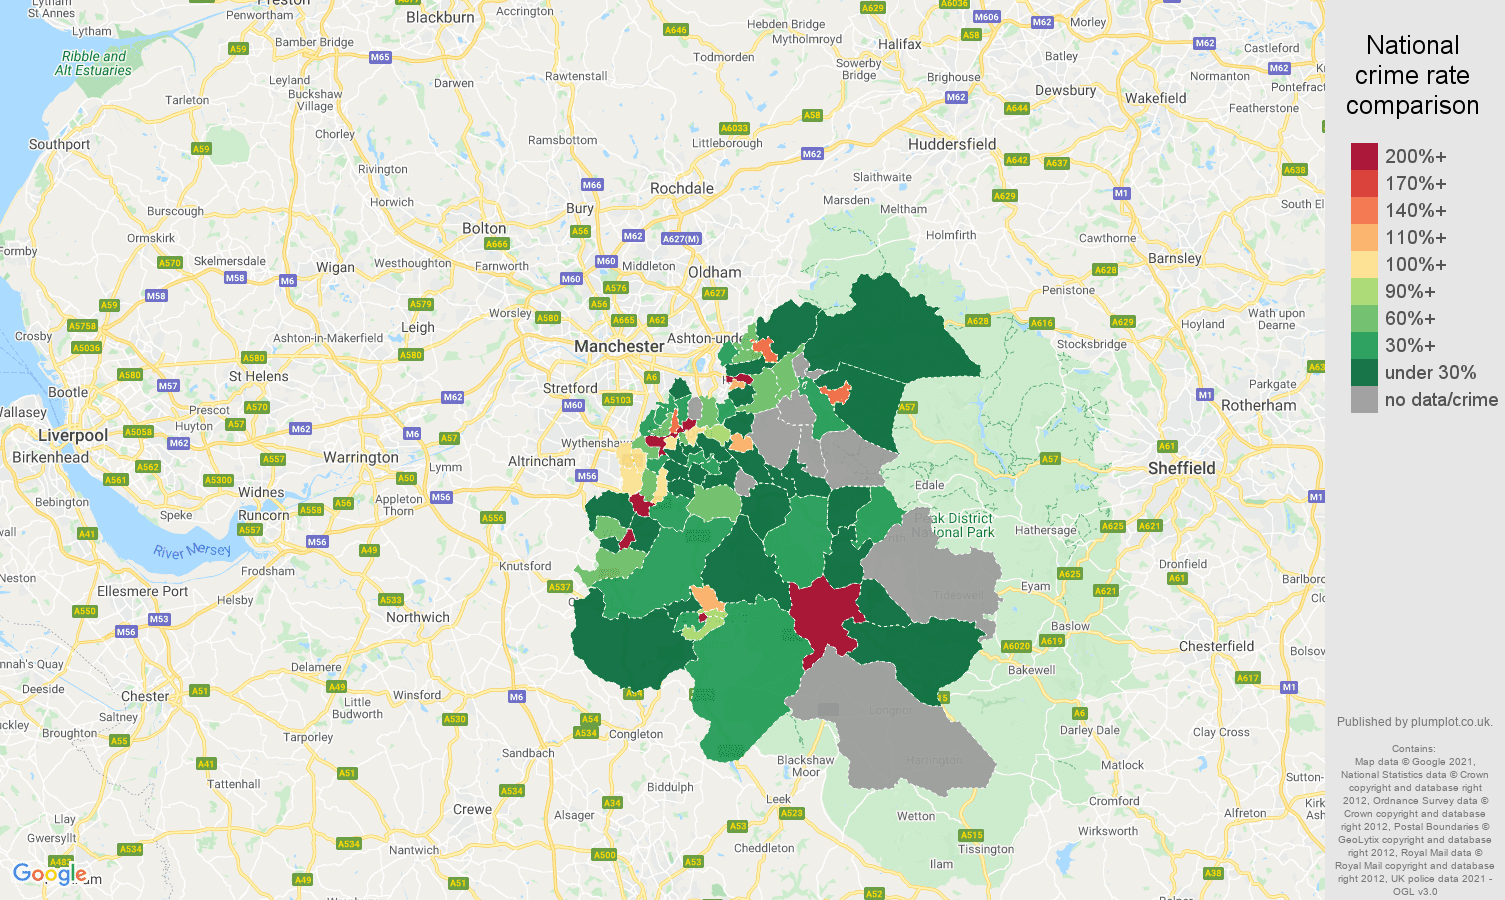 Stockport shoplifting crime rate comparison map